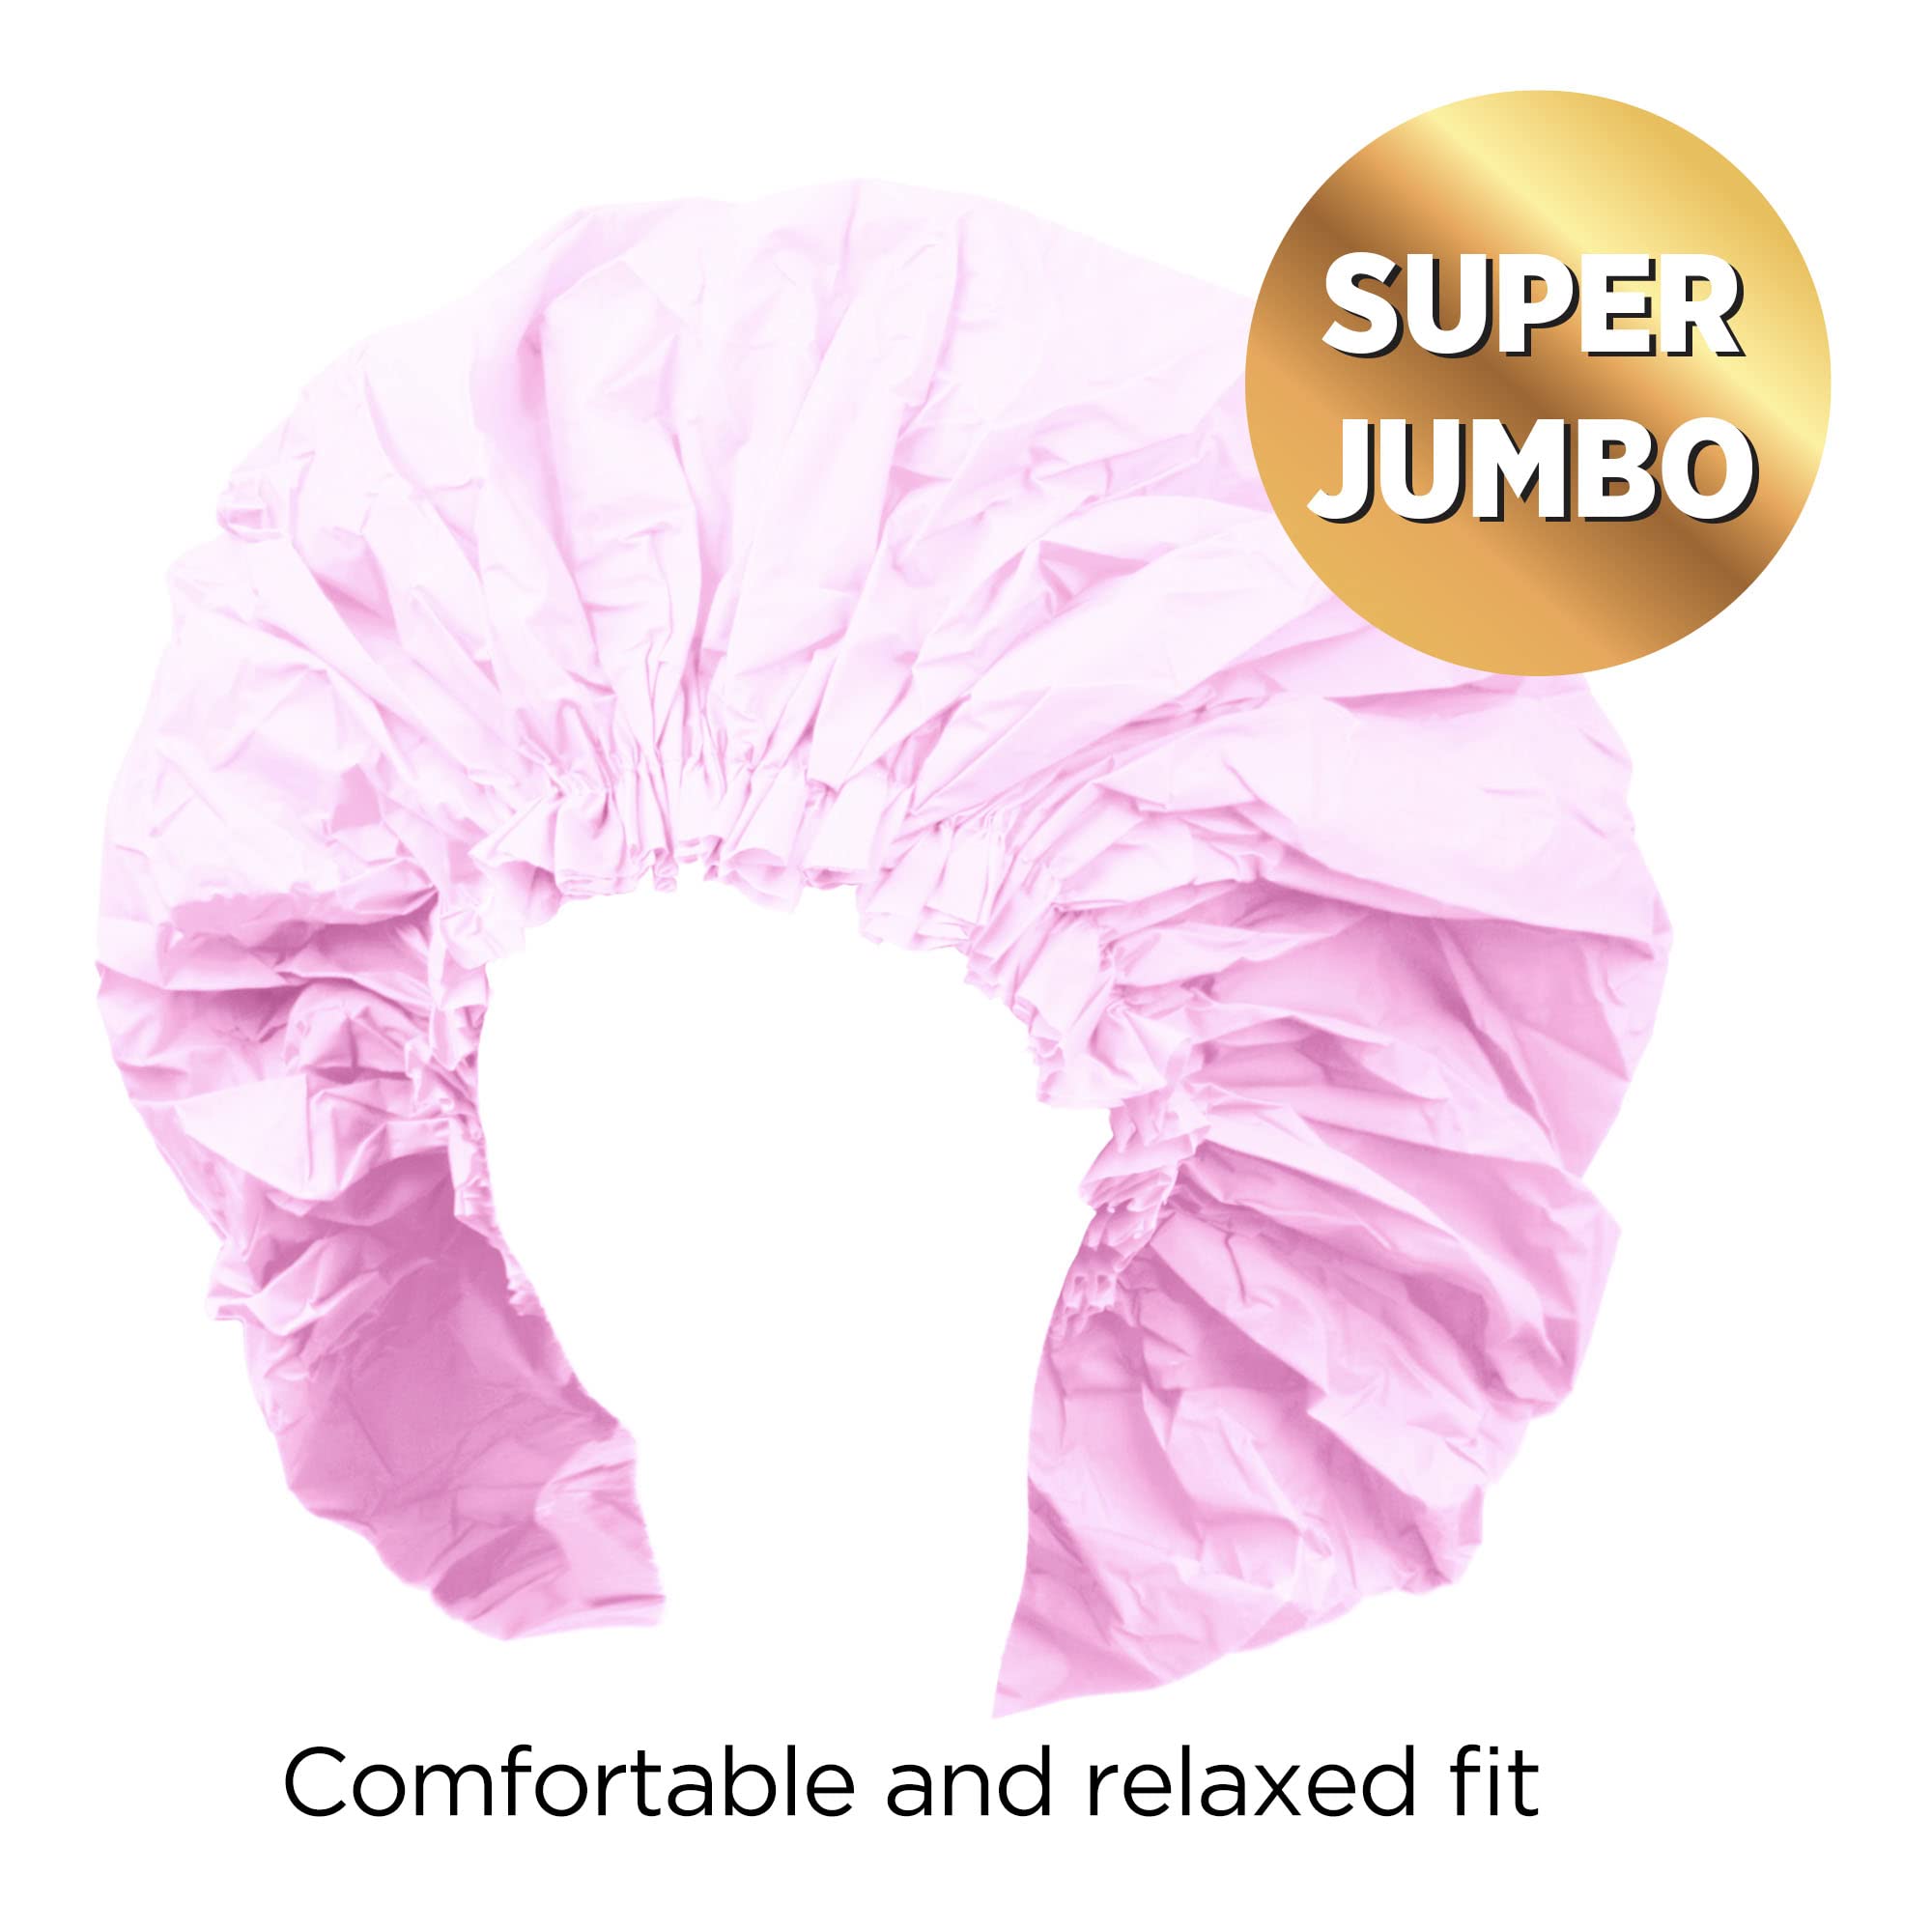 Donna Super Jumbo Shower Cap Waterproof Material 1pc for Women or Men Shower Cap for Roller Sets, Afros, Twist, Silk Wraps and More Reusable (PINK COLOR)